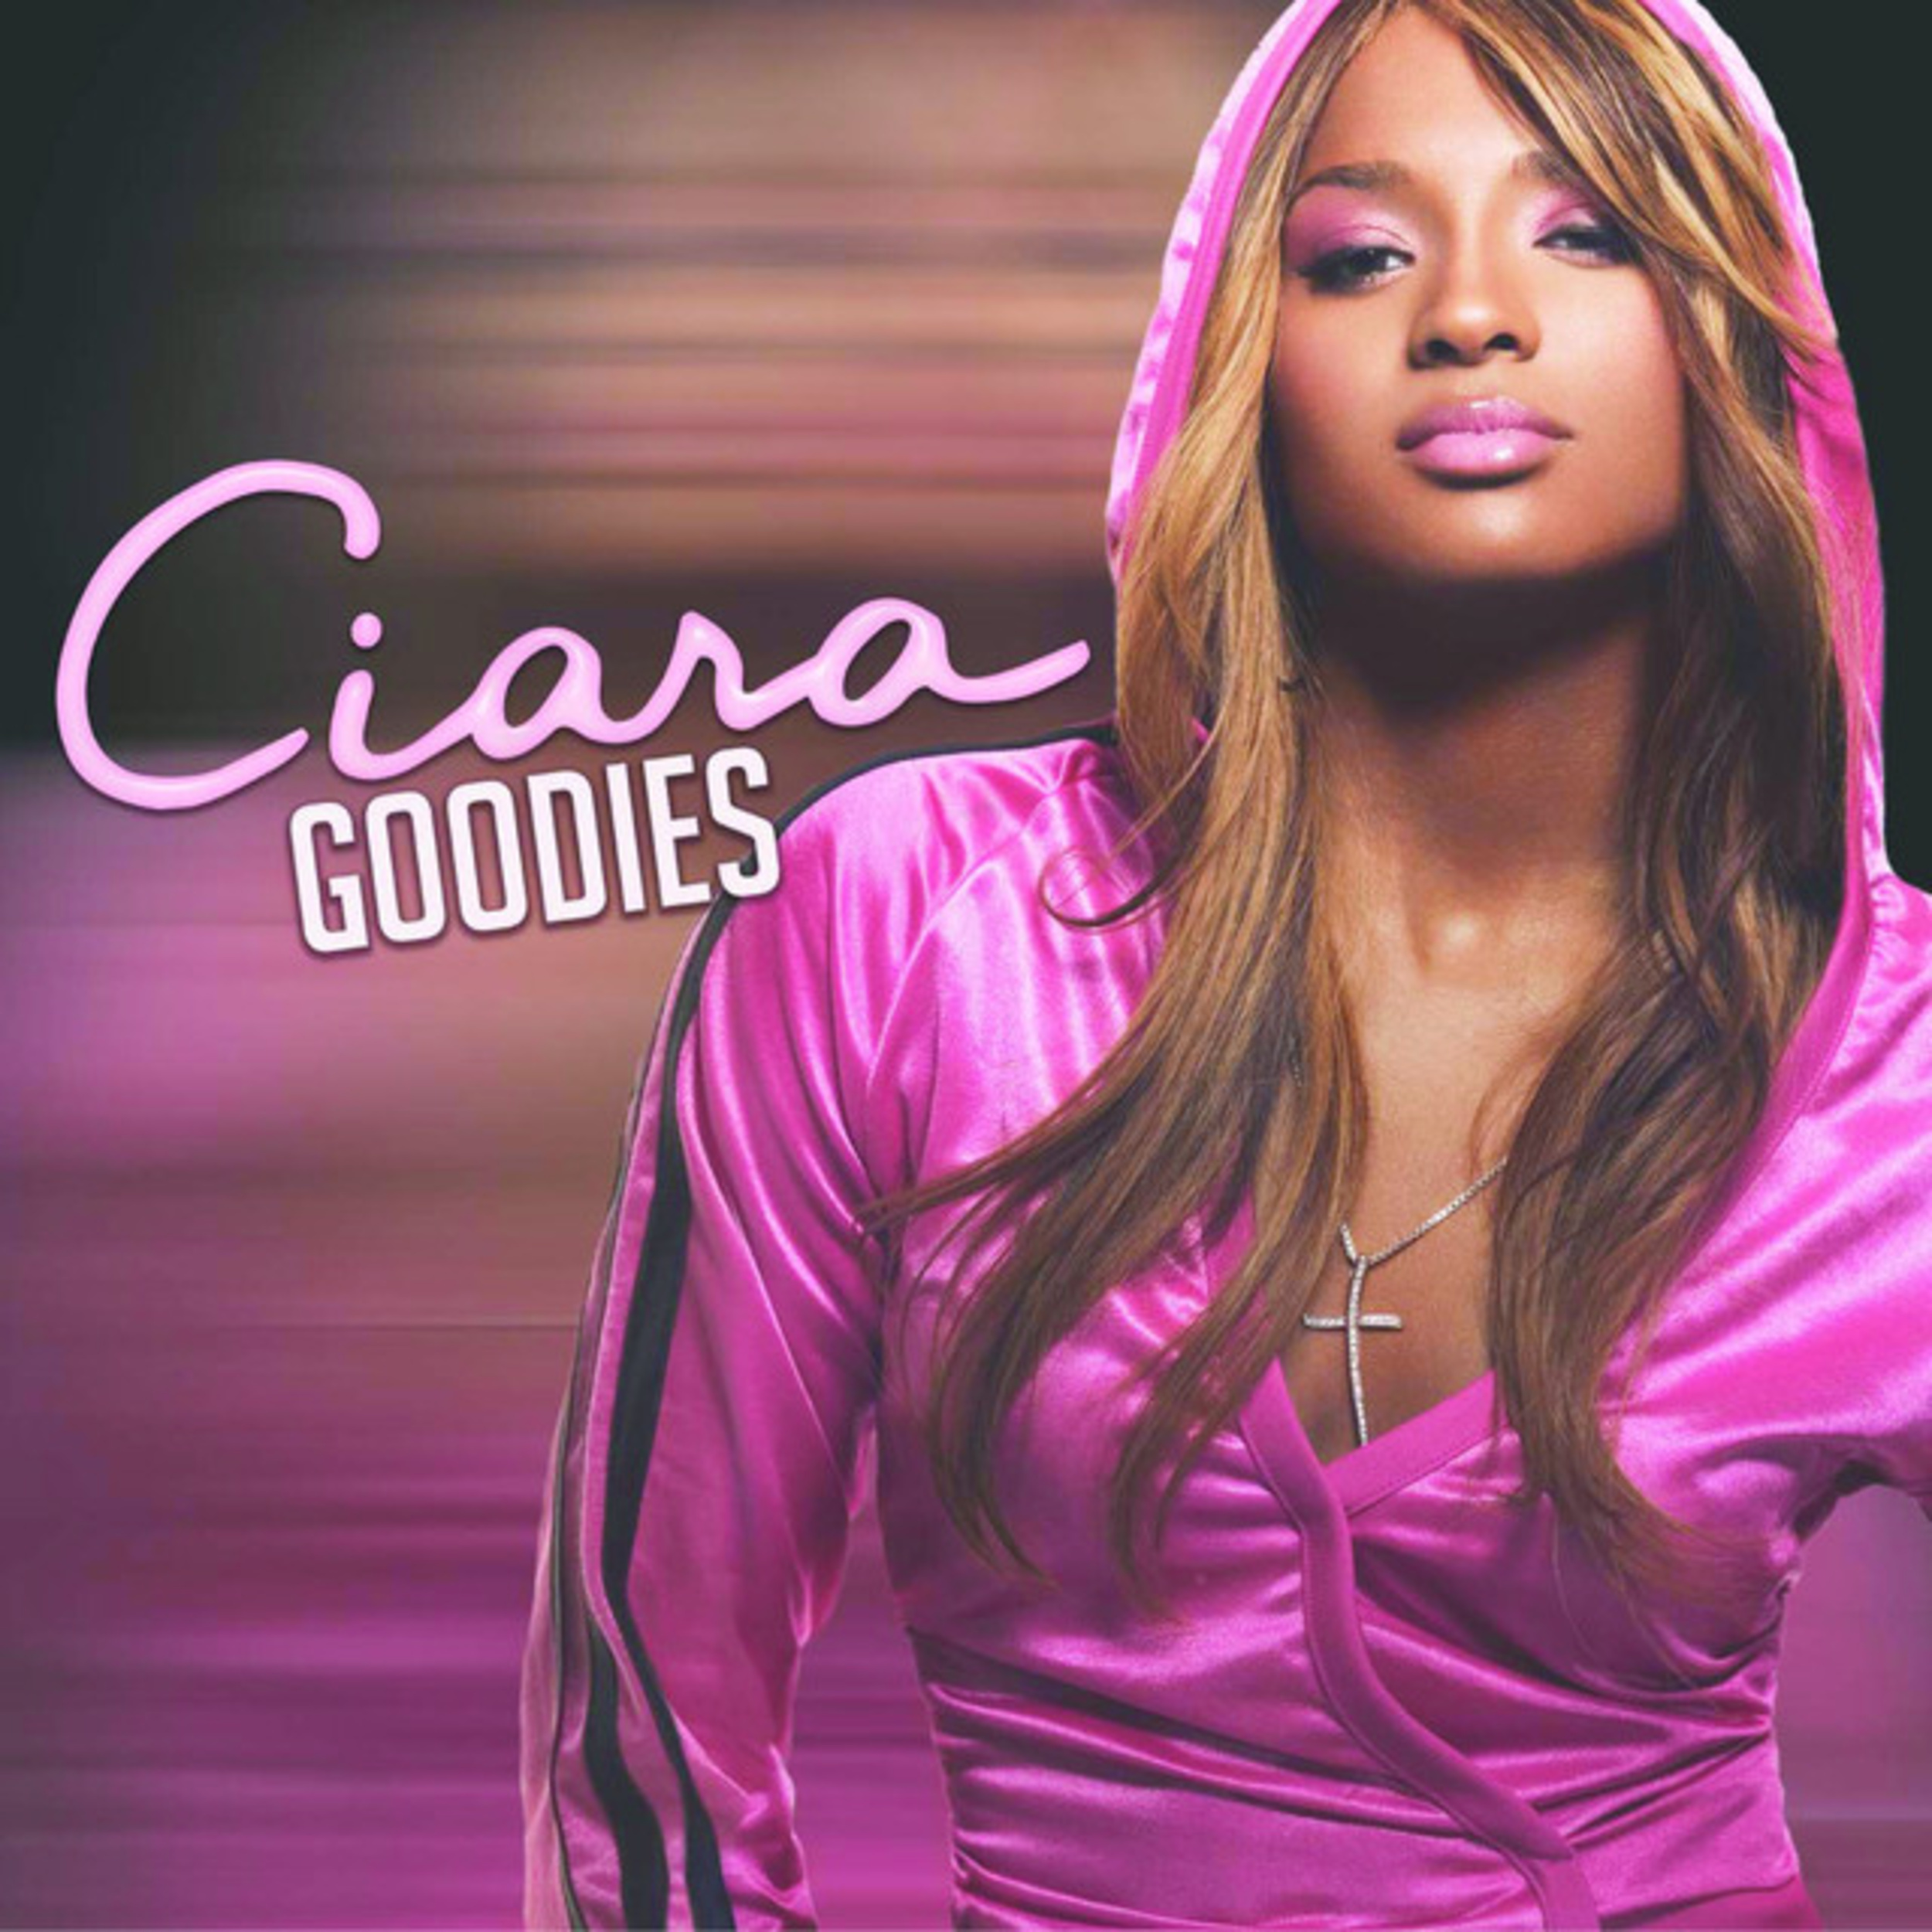 <p>Ciara had some of R&B and hip-hop's finest producers and songwriters on her debut album, <em>Goodies.</em> She brought a new sound to Atlanta R&B, which helped dub her as the princess of crunk&b. With singles like<a href="https://www.youtube.com/watch?v=iBHNgV6_znU"> "1, 2 Step,"</a> "Oh," and the album title track, Ciara was poised to bring a new flair to the R&B industry. </p><p>You may also like: <a href='https://www.yardbarker.com/entertainment/articles/20_disney_movies_you_totally_forgot_existed_022024/s1__39466485'>20 Disney movies you totally forgot existed</a></p>